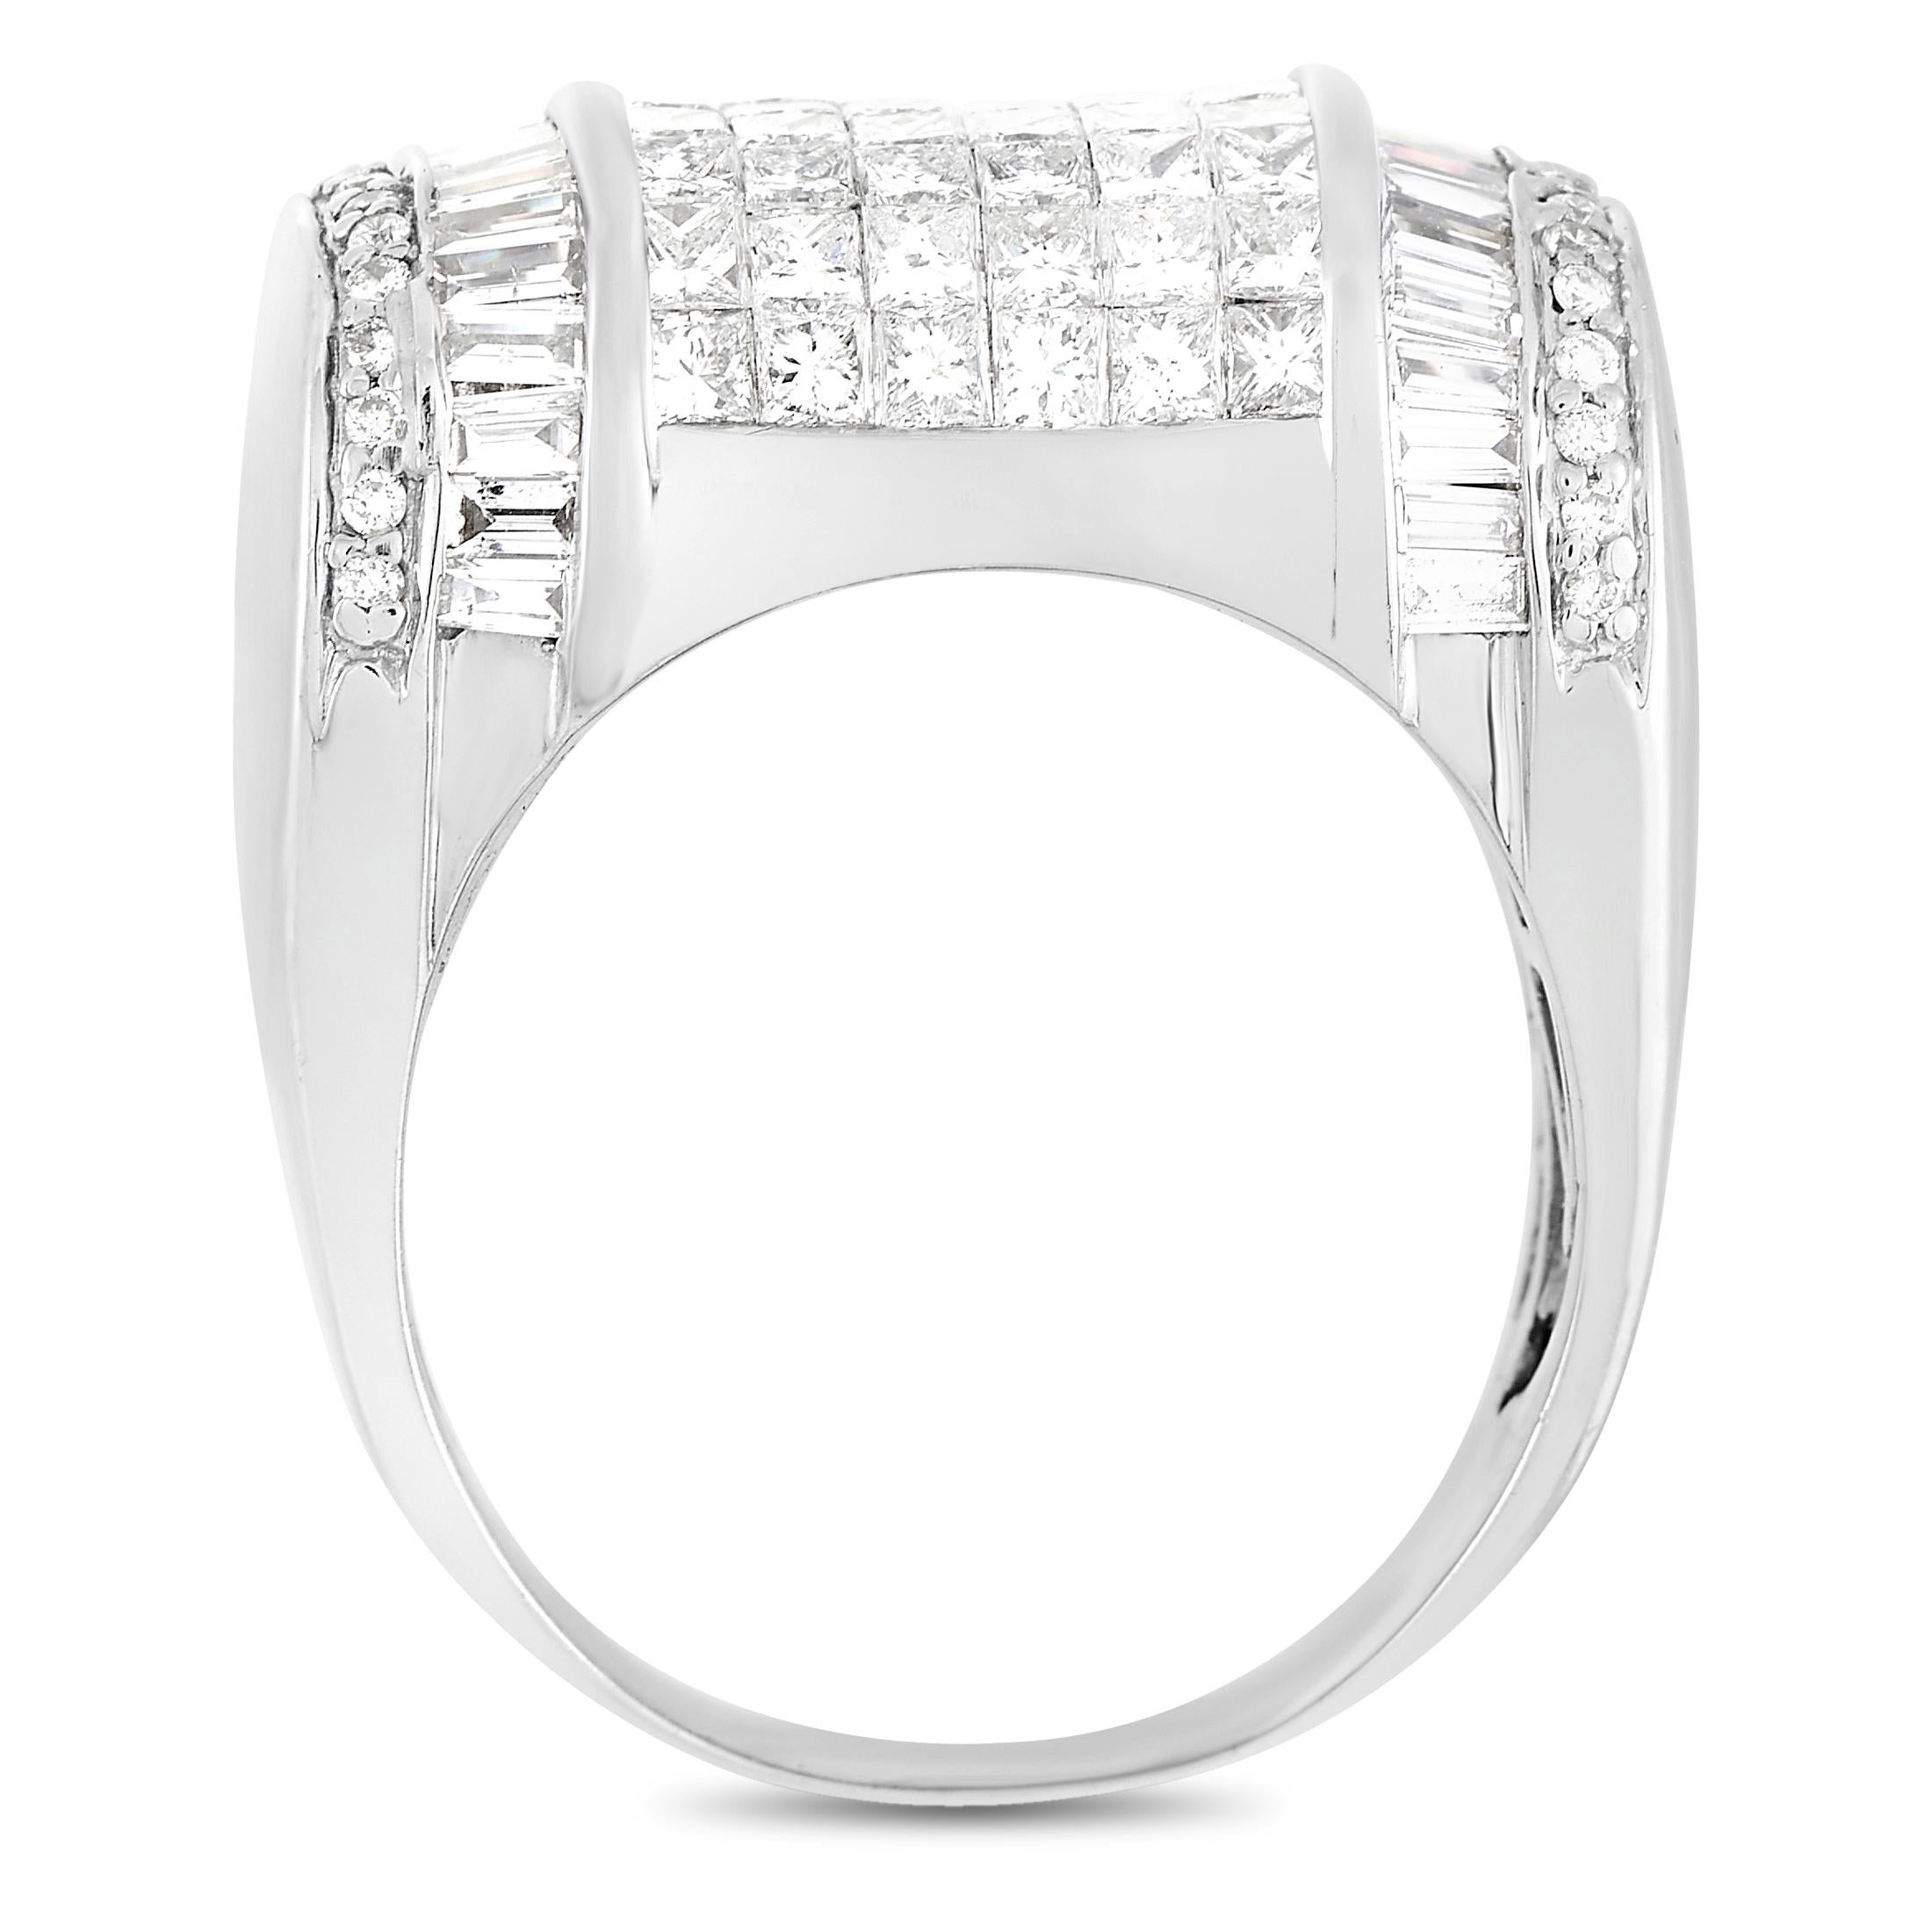 This is a bold piece of jewelry with a commanding presence. An array of round and step-cut diamonds add sparkle and shine to this ring’s signature geometric design. Impeccably designed, the rounded design comes to life thanks to the glistening 18K